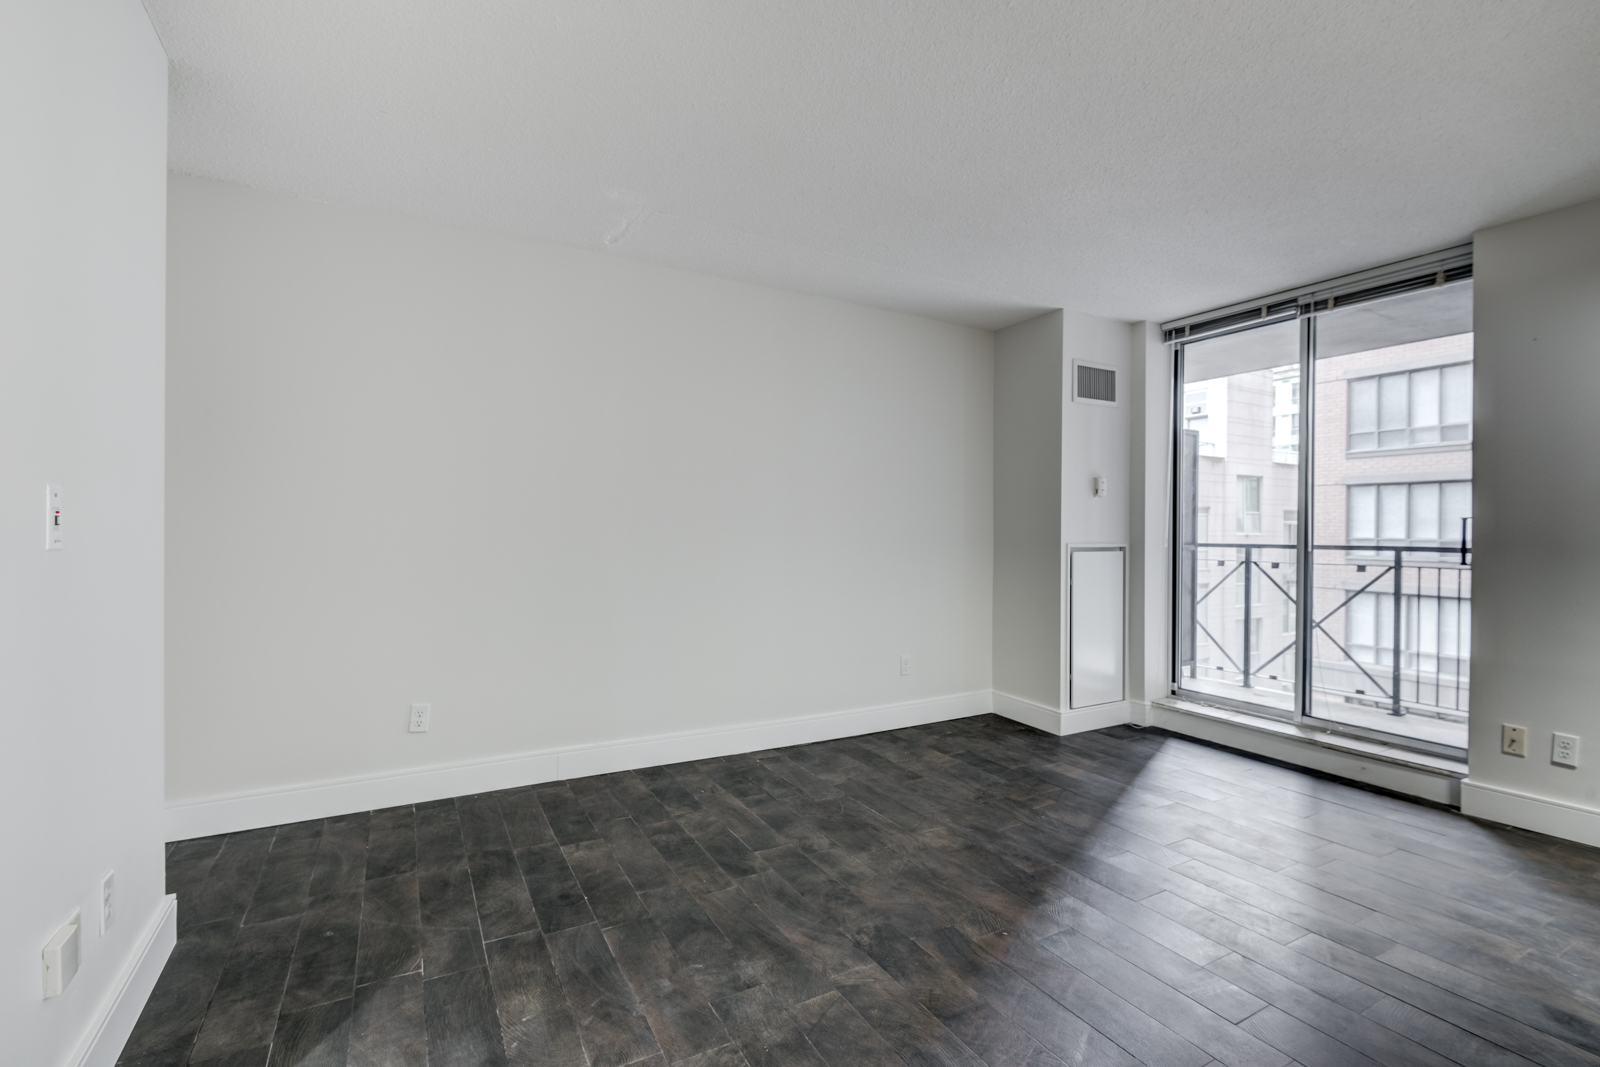 Empty condo with view of balcony and light.